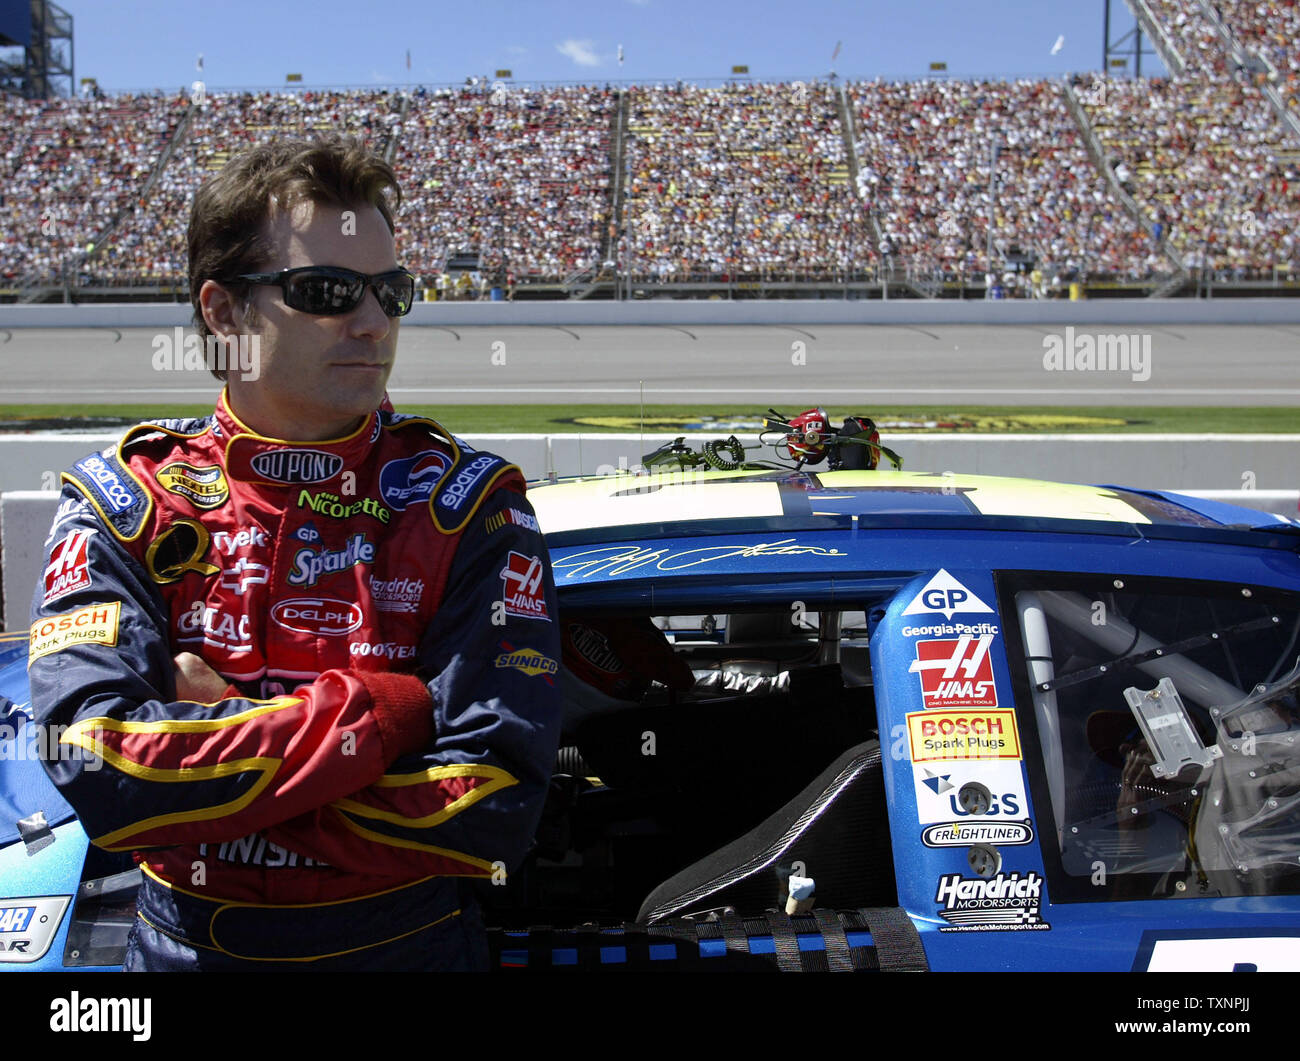 Nascar driver Jeff Gordon leans on his car while talking with his crew prior to the start of the GFS Marketplace 400 at the Michigan International Speedway in Brooklyn, Michigan on August 20, 2006.  Gordon finished the 200 lap race in second place.  (UPI Photo/Scott R. Galvin) Stock Photo